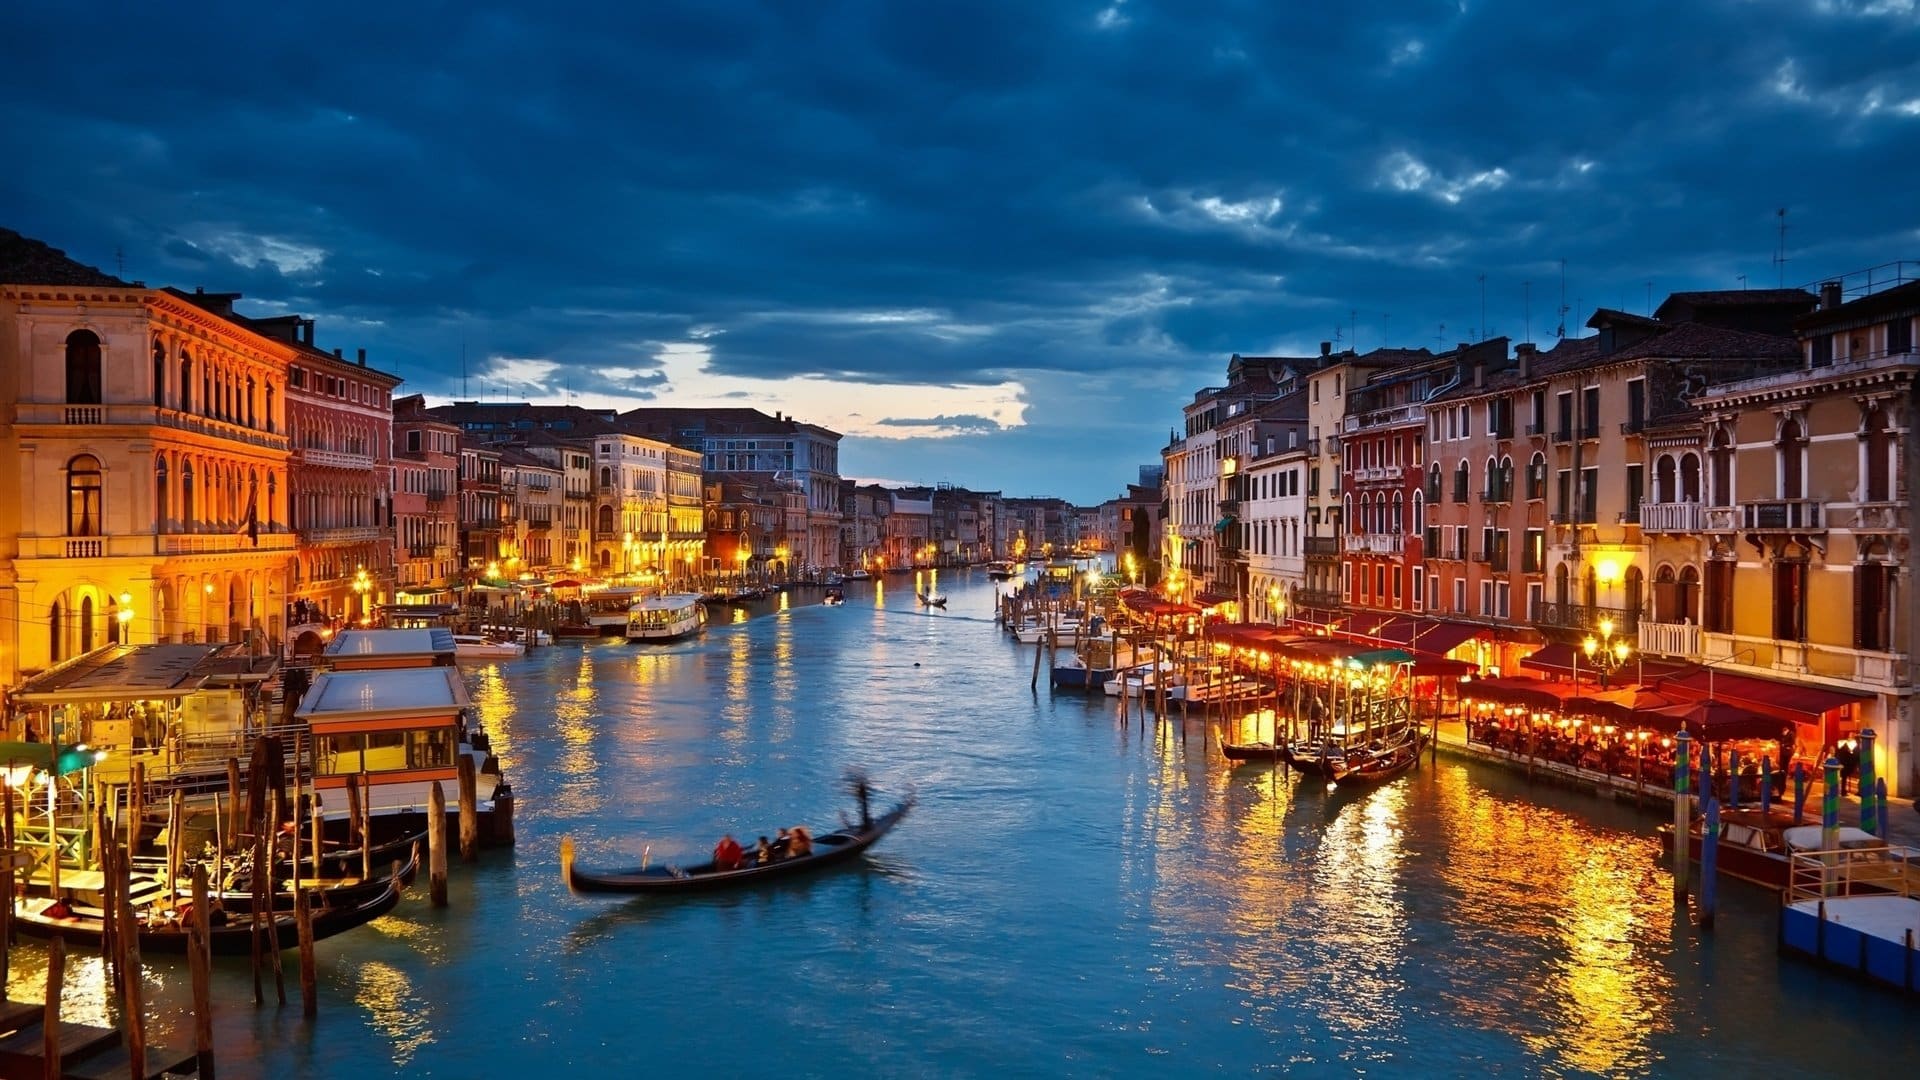 2-The-lights-of-Venice-Canal-at-night